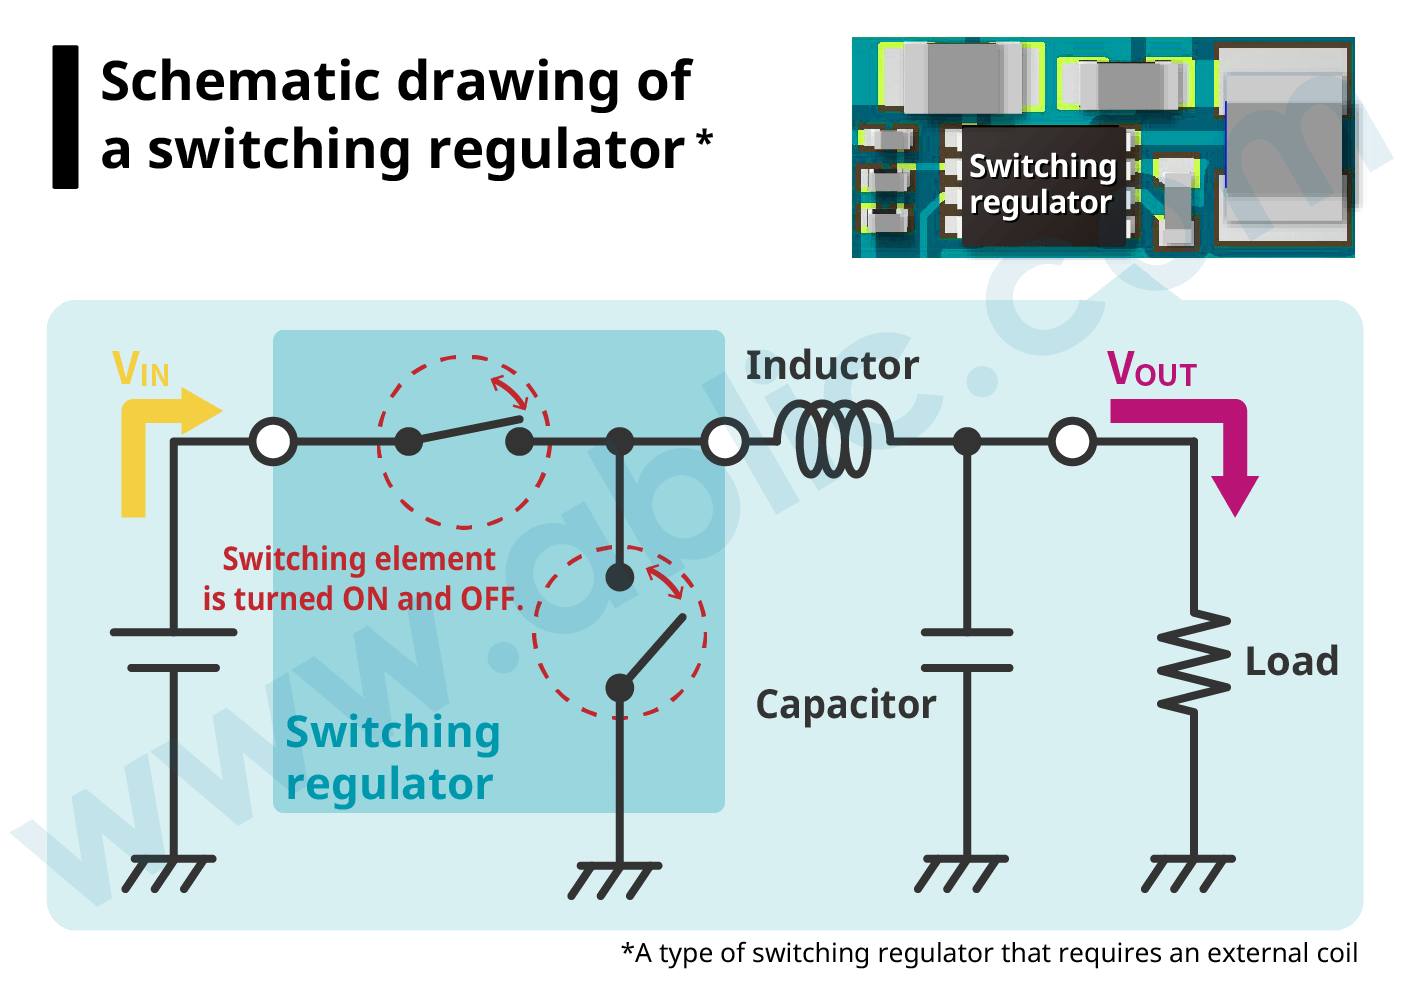 Schematic drawing of a switching regulator